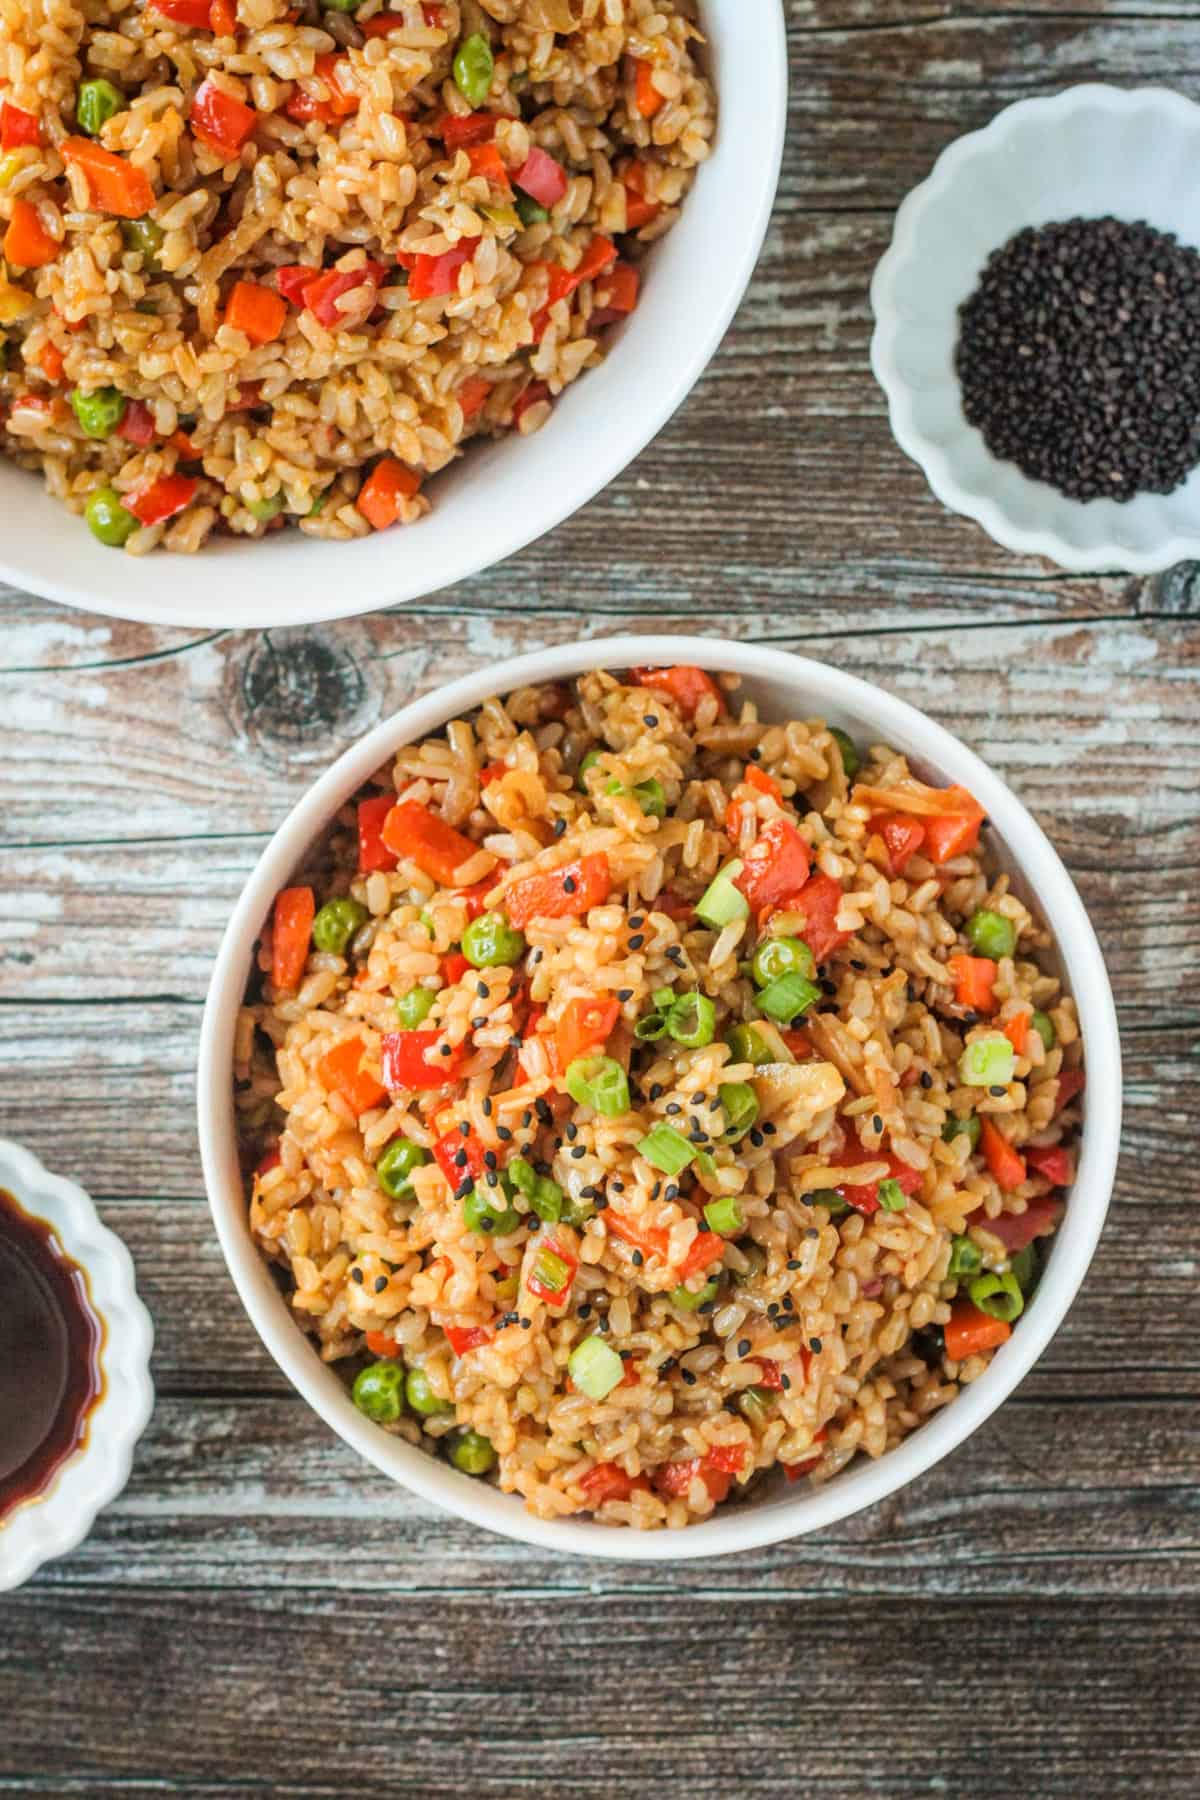 Bowl of vegan fried rice next to small bowls of soy sauce and black sesame seeds.